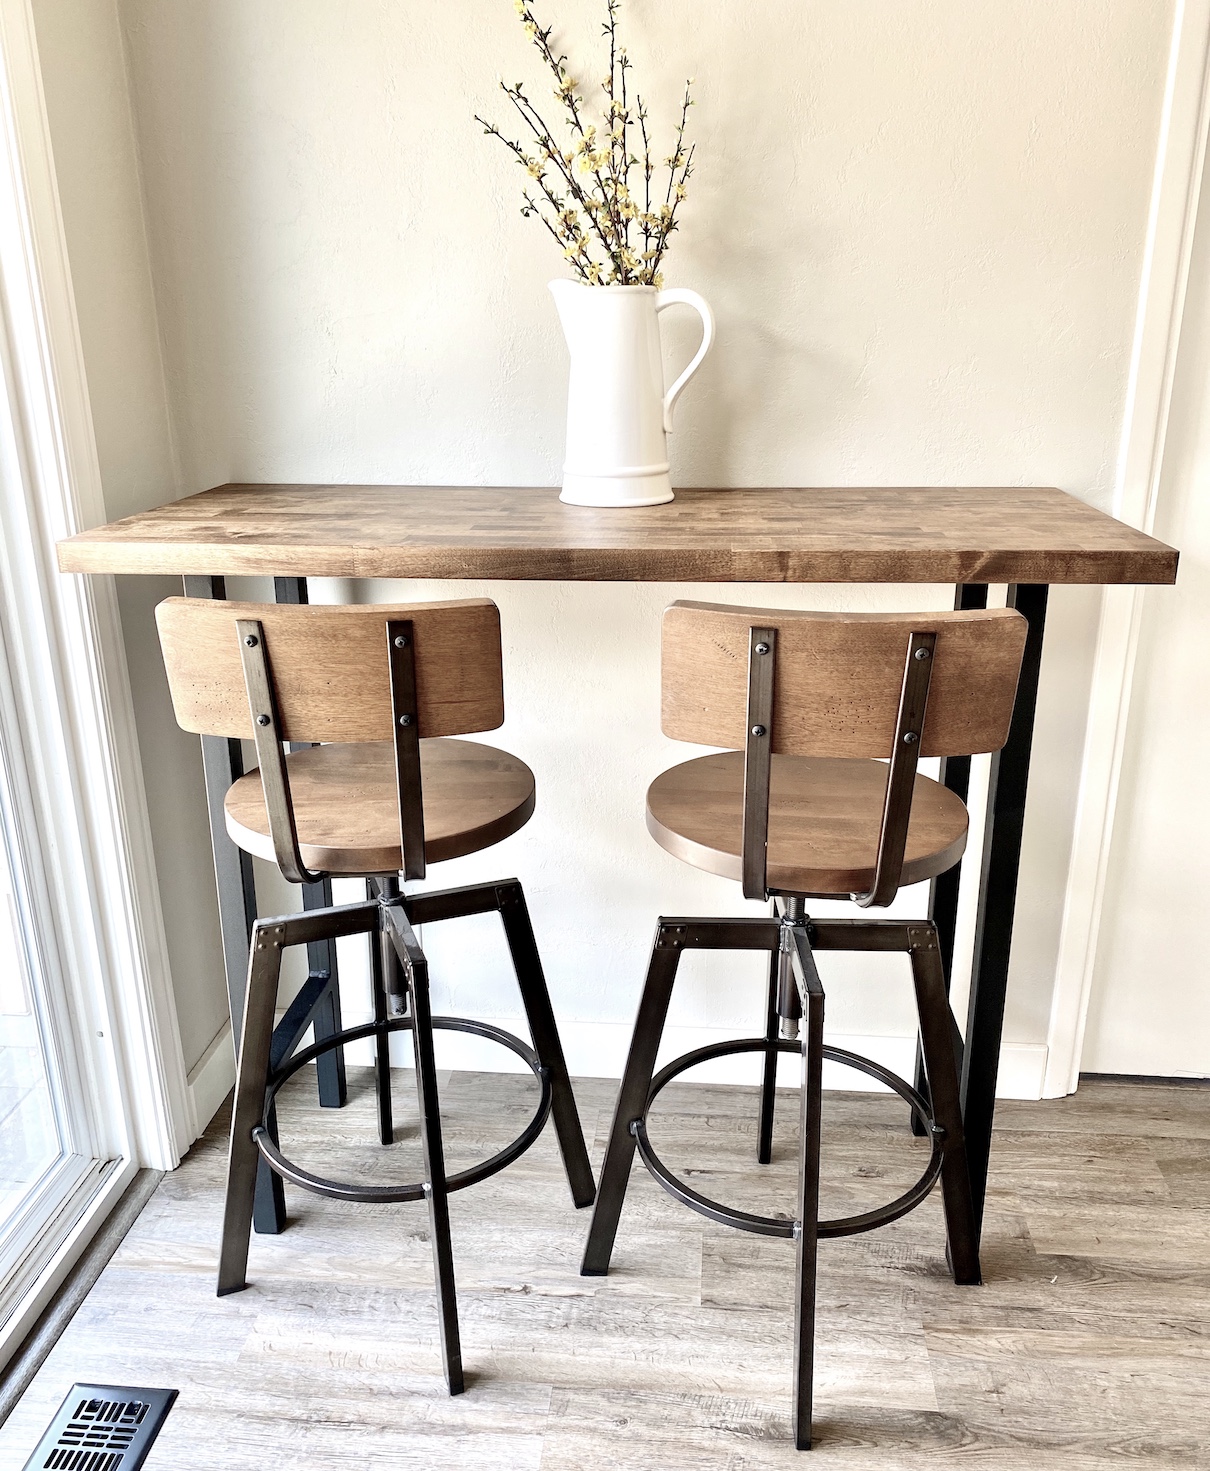 diy kitchen table with metal legs